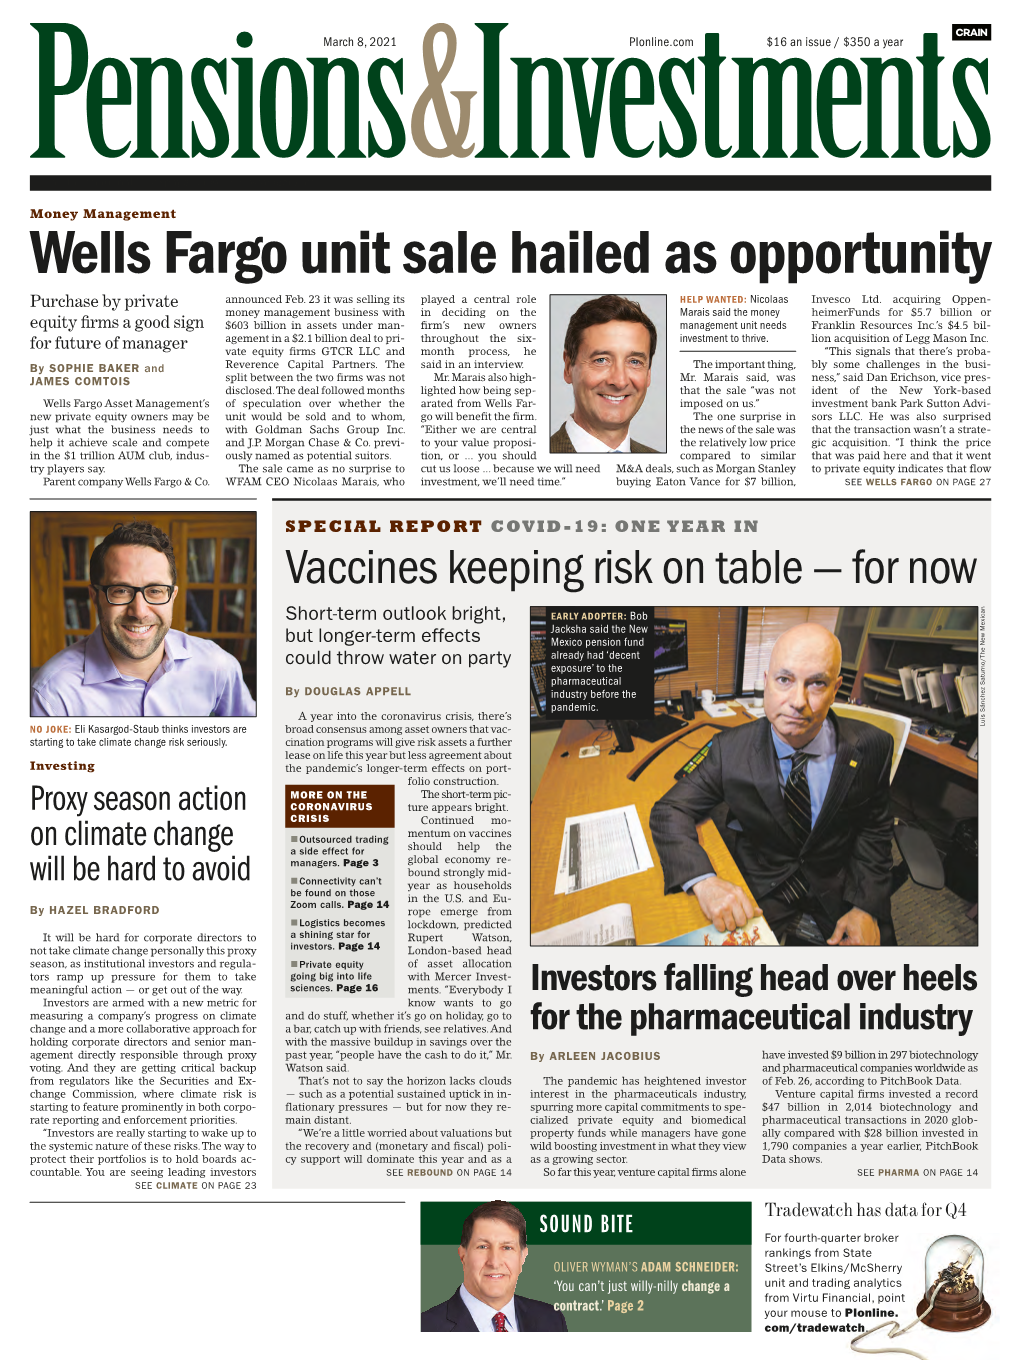 Wells Fargo Unit Sale Hailed As Opportunity Purchase by Private Announced Feb